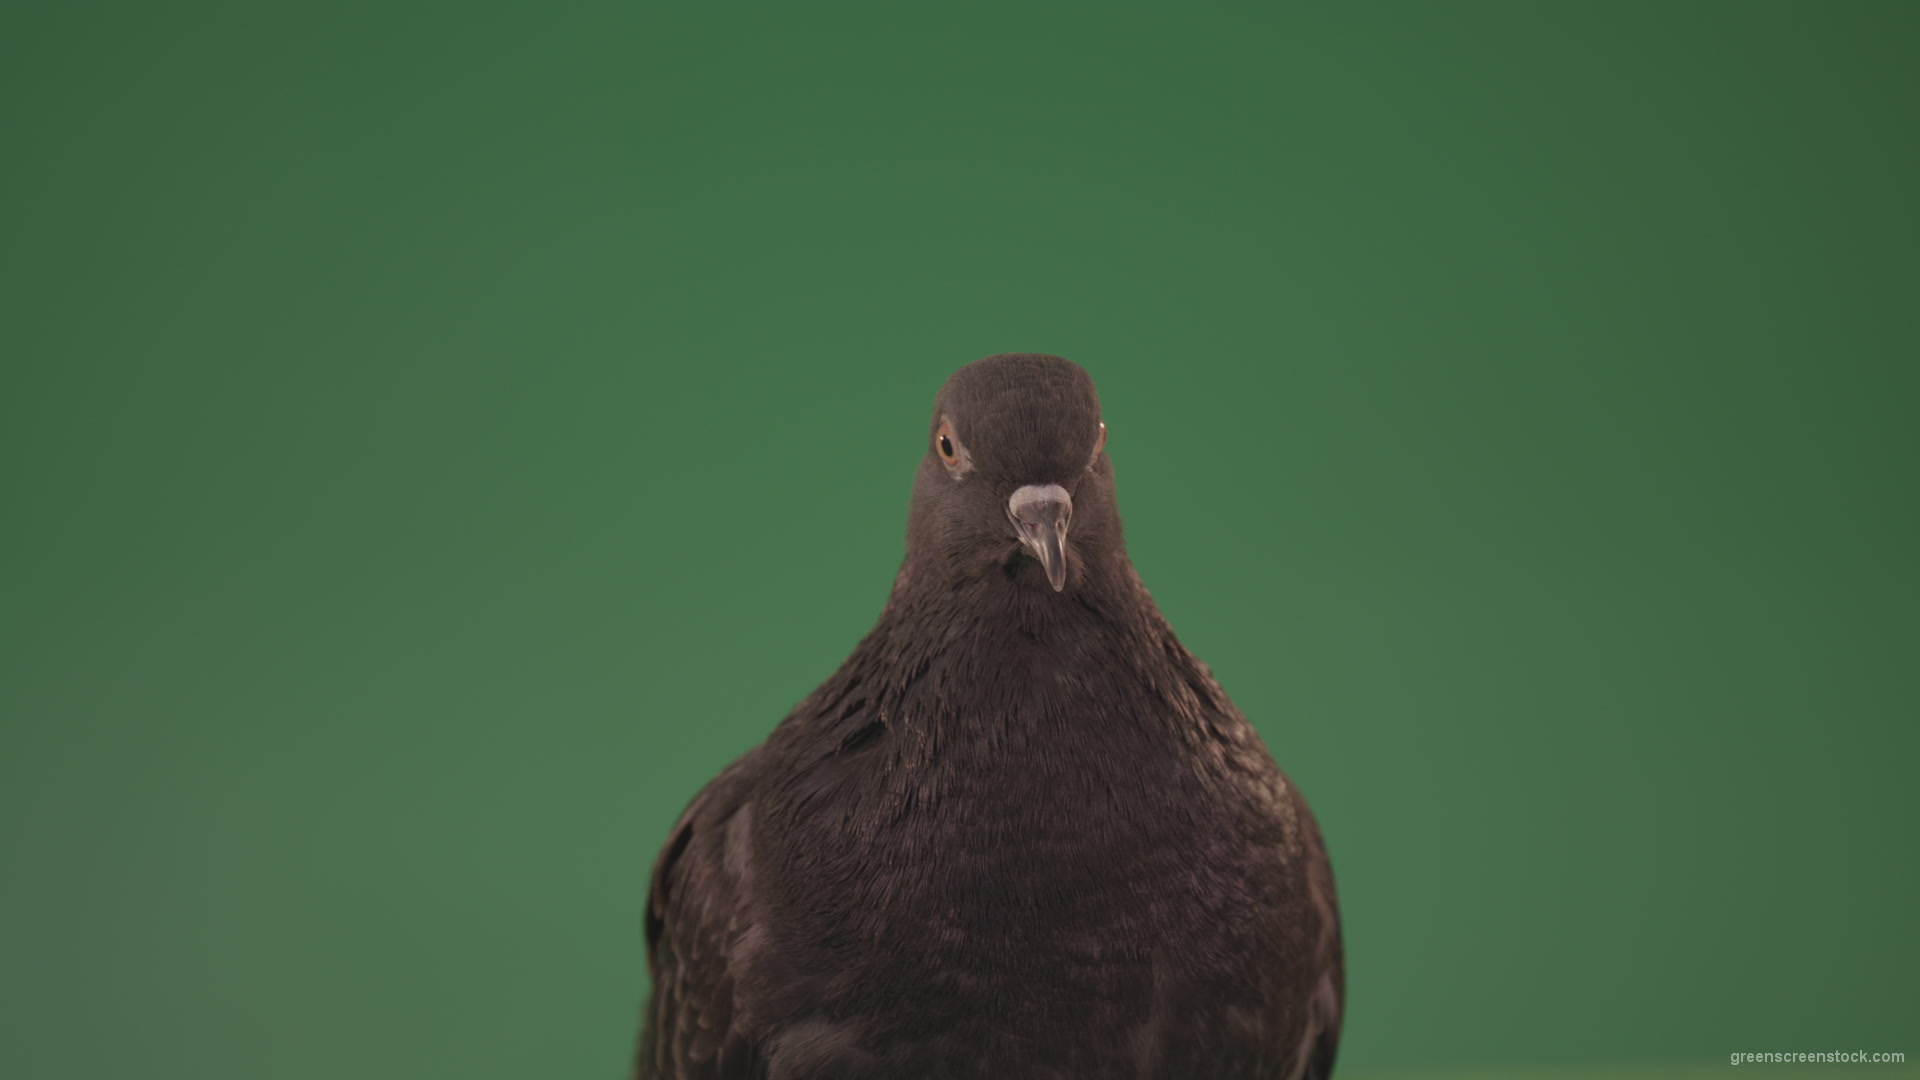 Bird-of-pigeon-is-sitting-on-the-house-and-looking-at-the-city-isolated-on-chromakey-background_008 Green Screen Stock